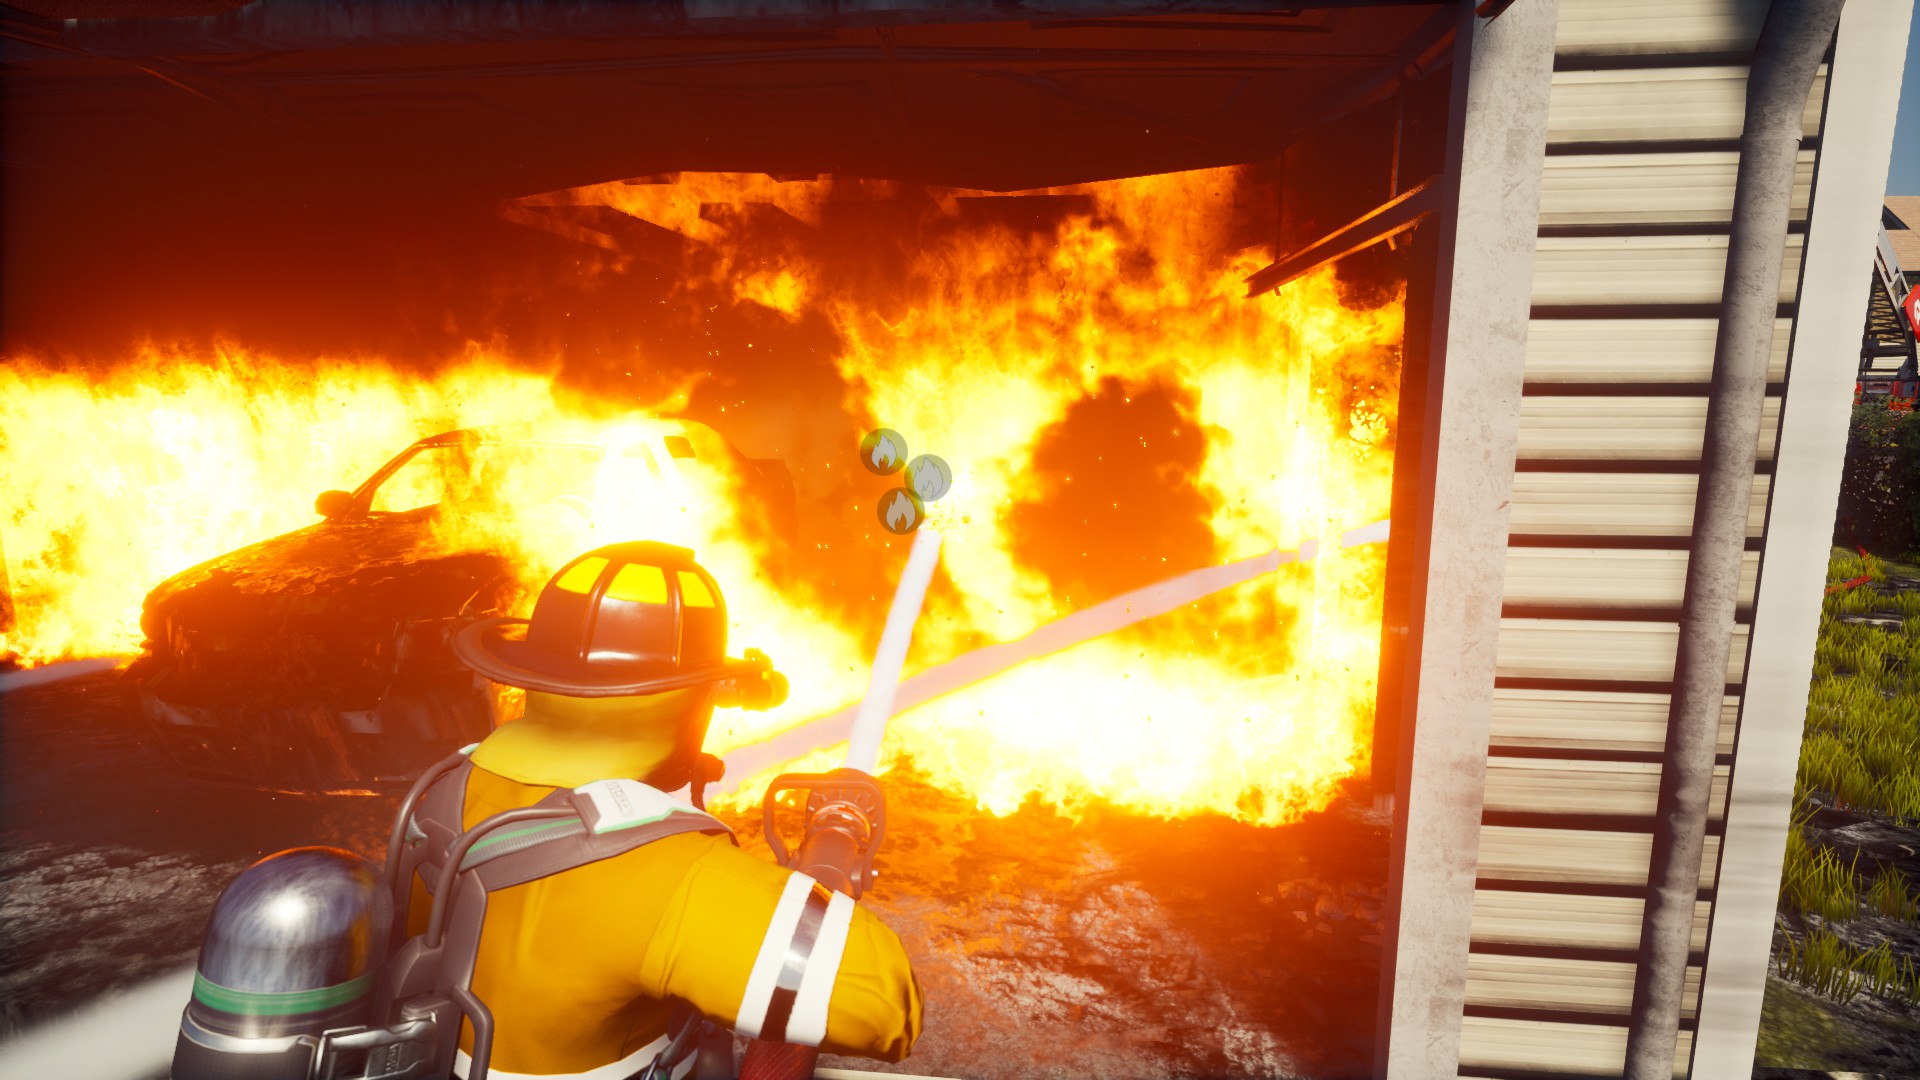 Firefighting Simulator the review and Squad the -- fire Through shame The 